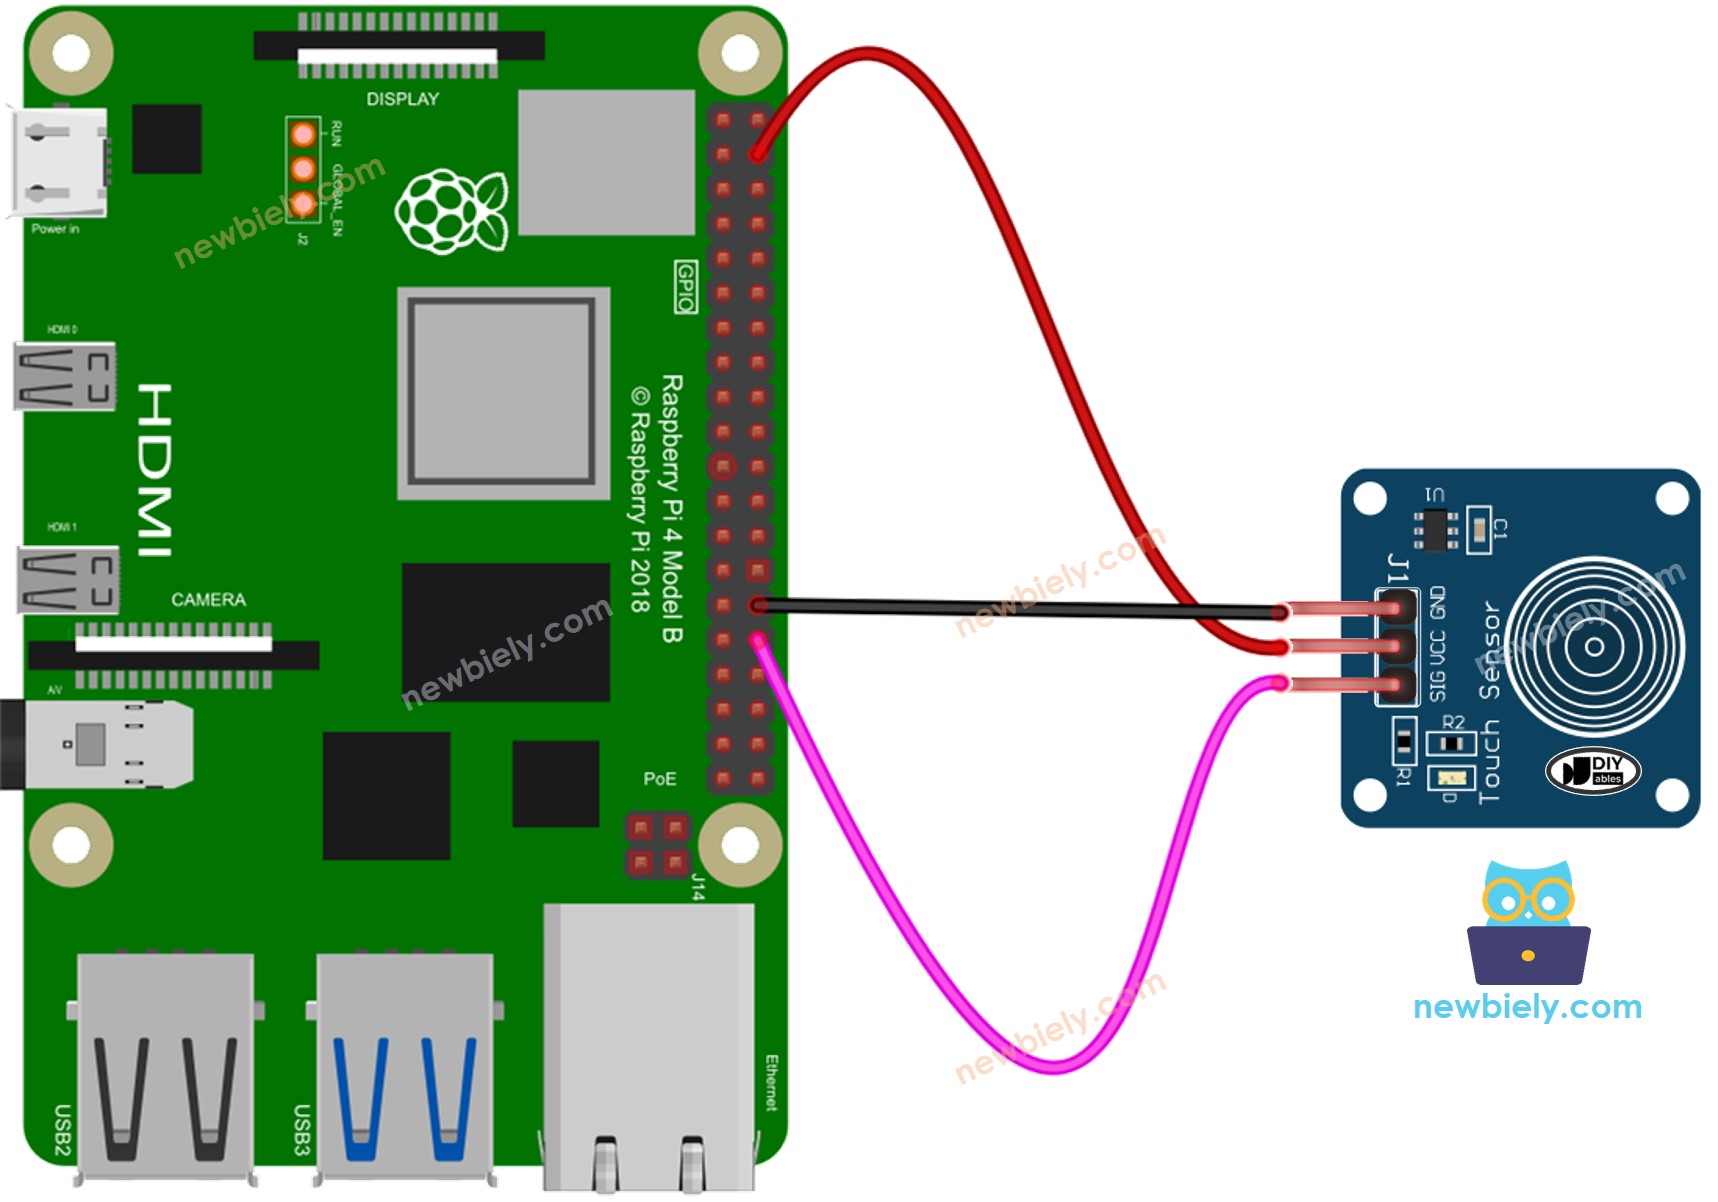 The wiring diagram between Raspberry Pi and Touch Sensor